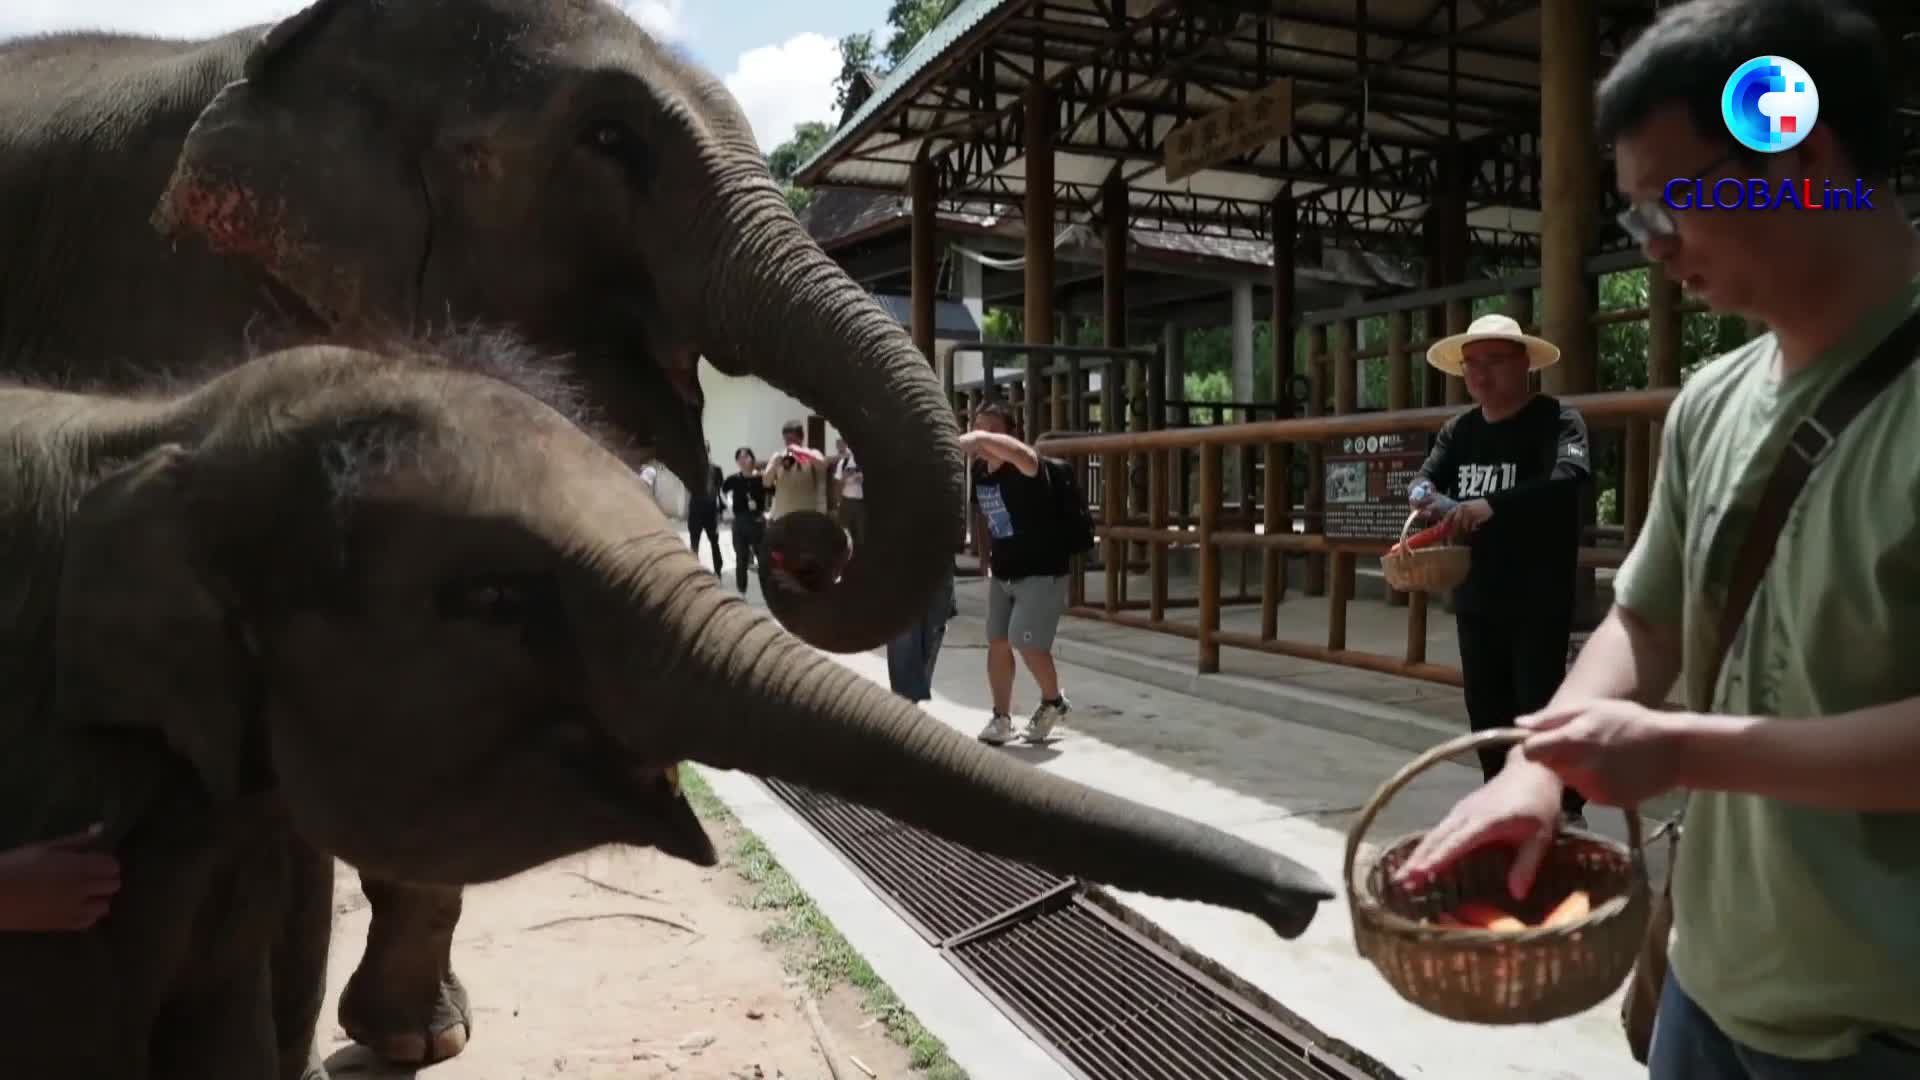 GLOBALink | Lao people take China-Laos Railway to visit elephant protection center in Kunming, China